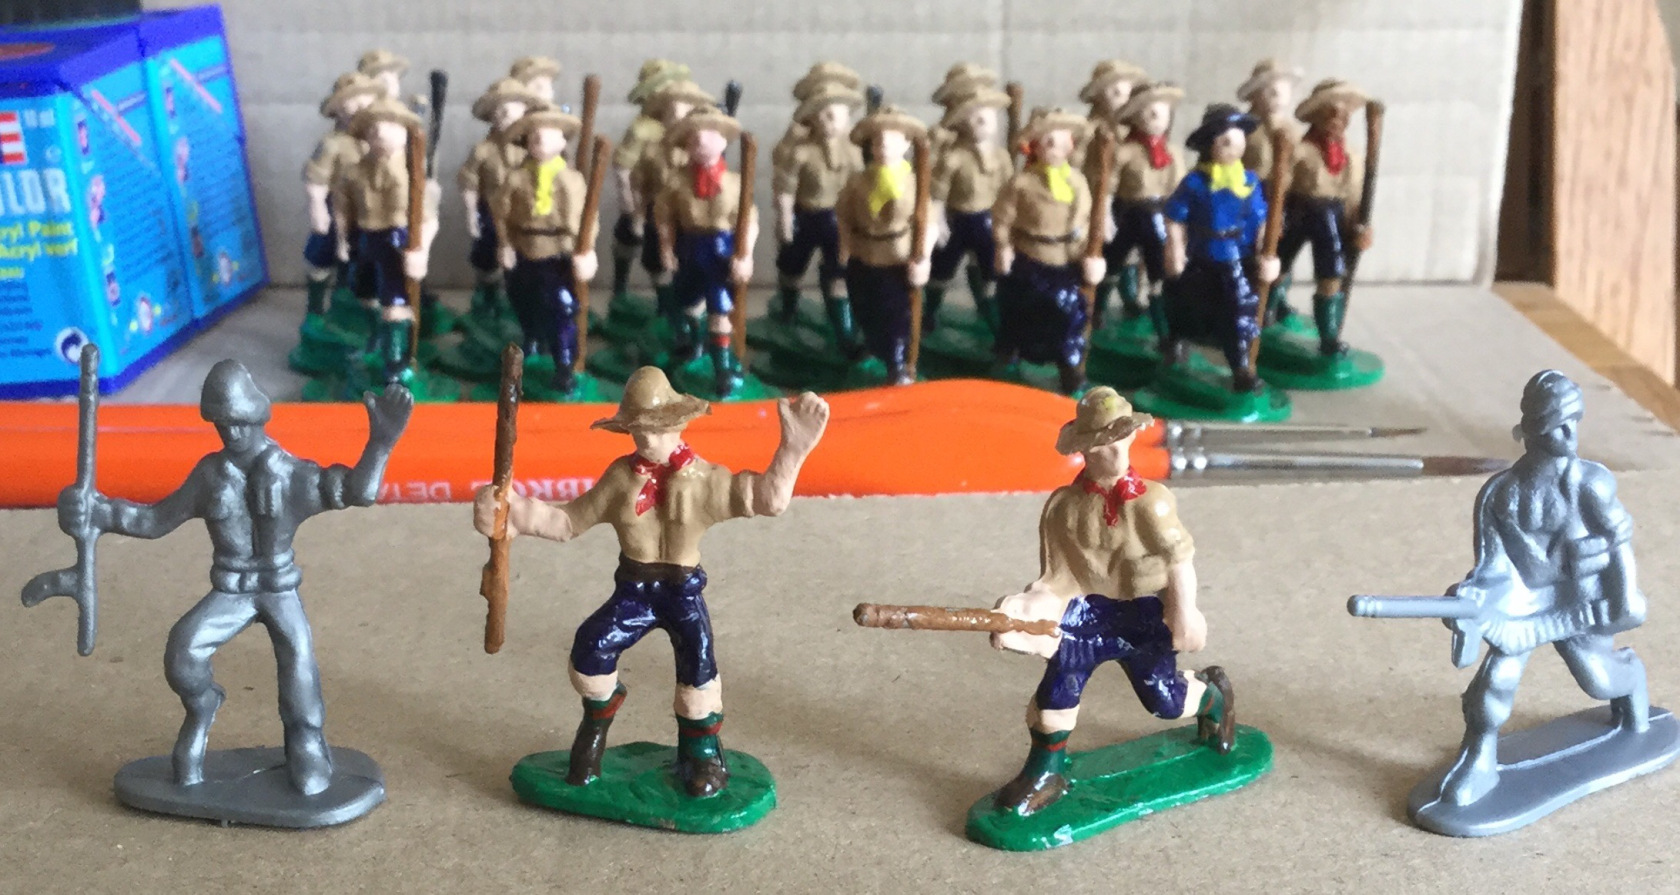 boy scout figurines